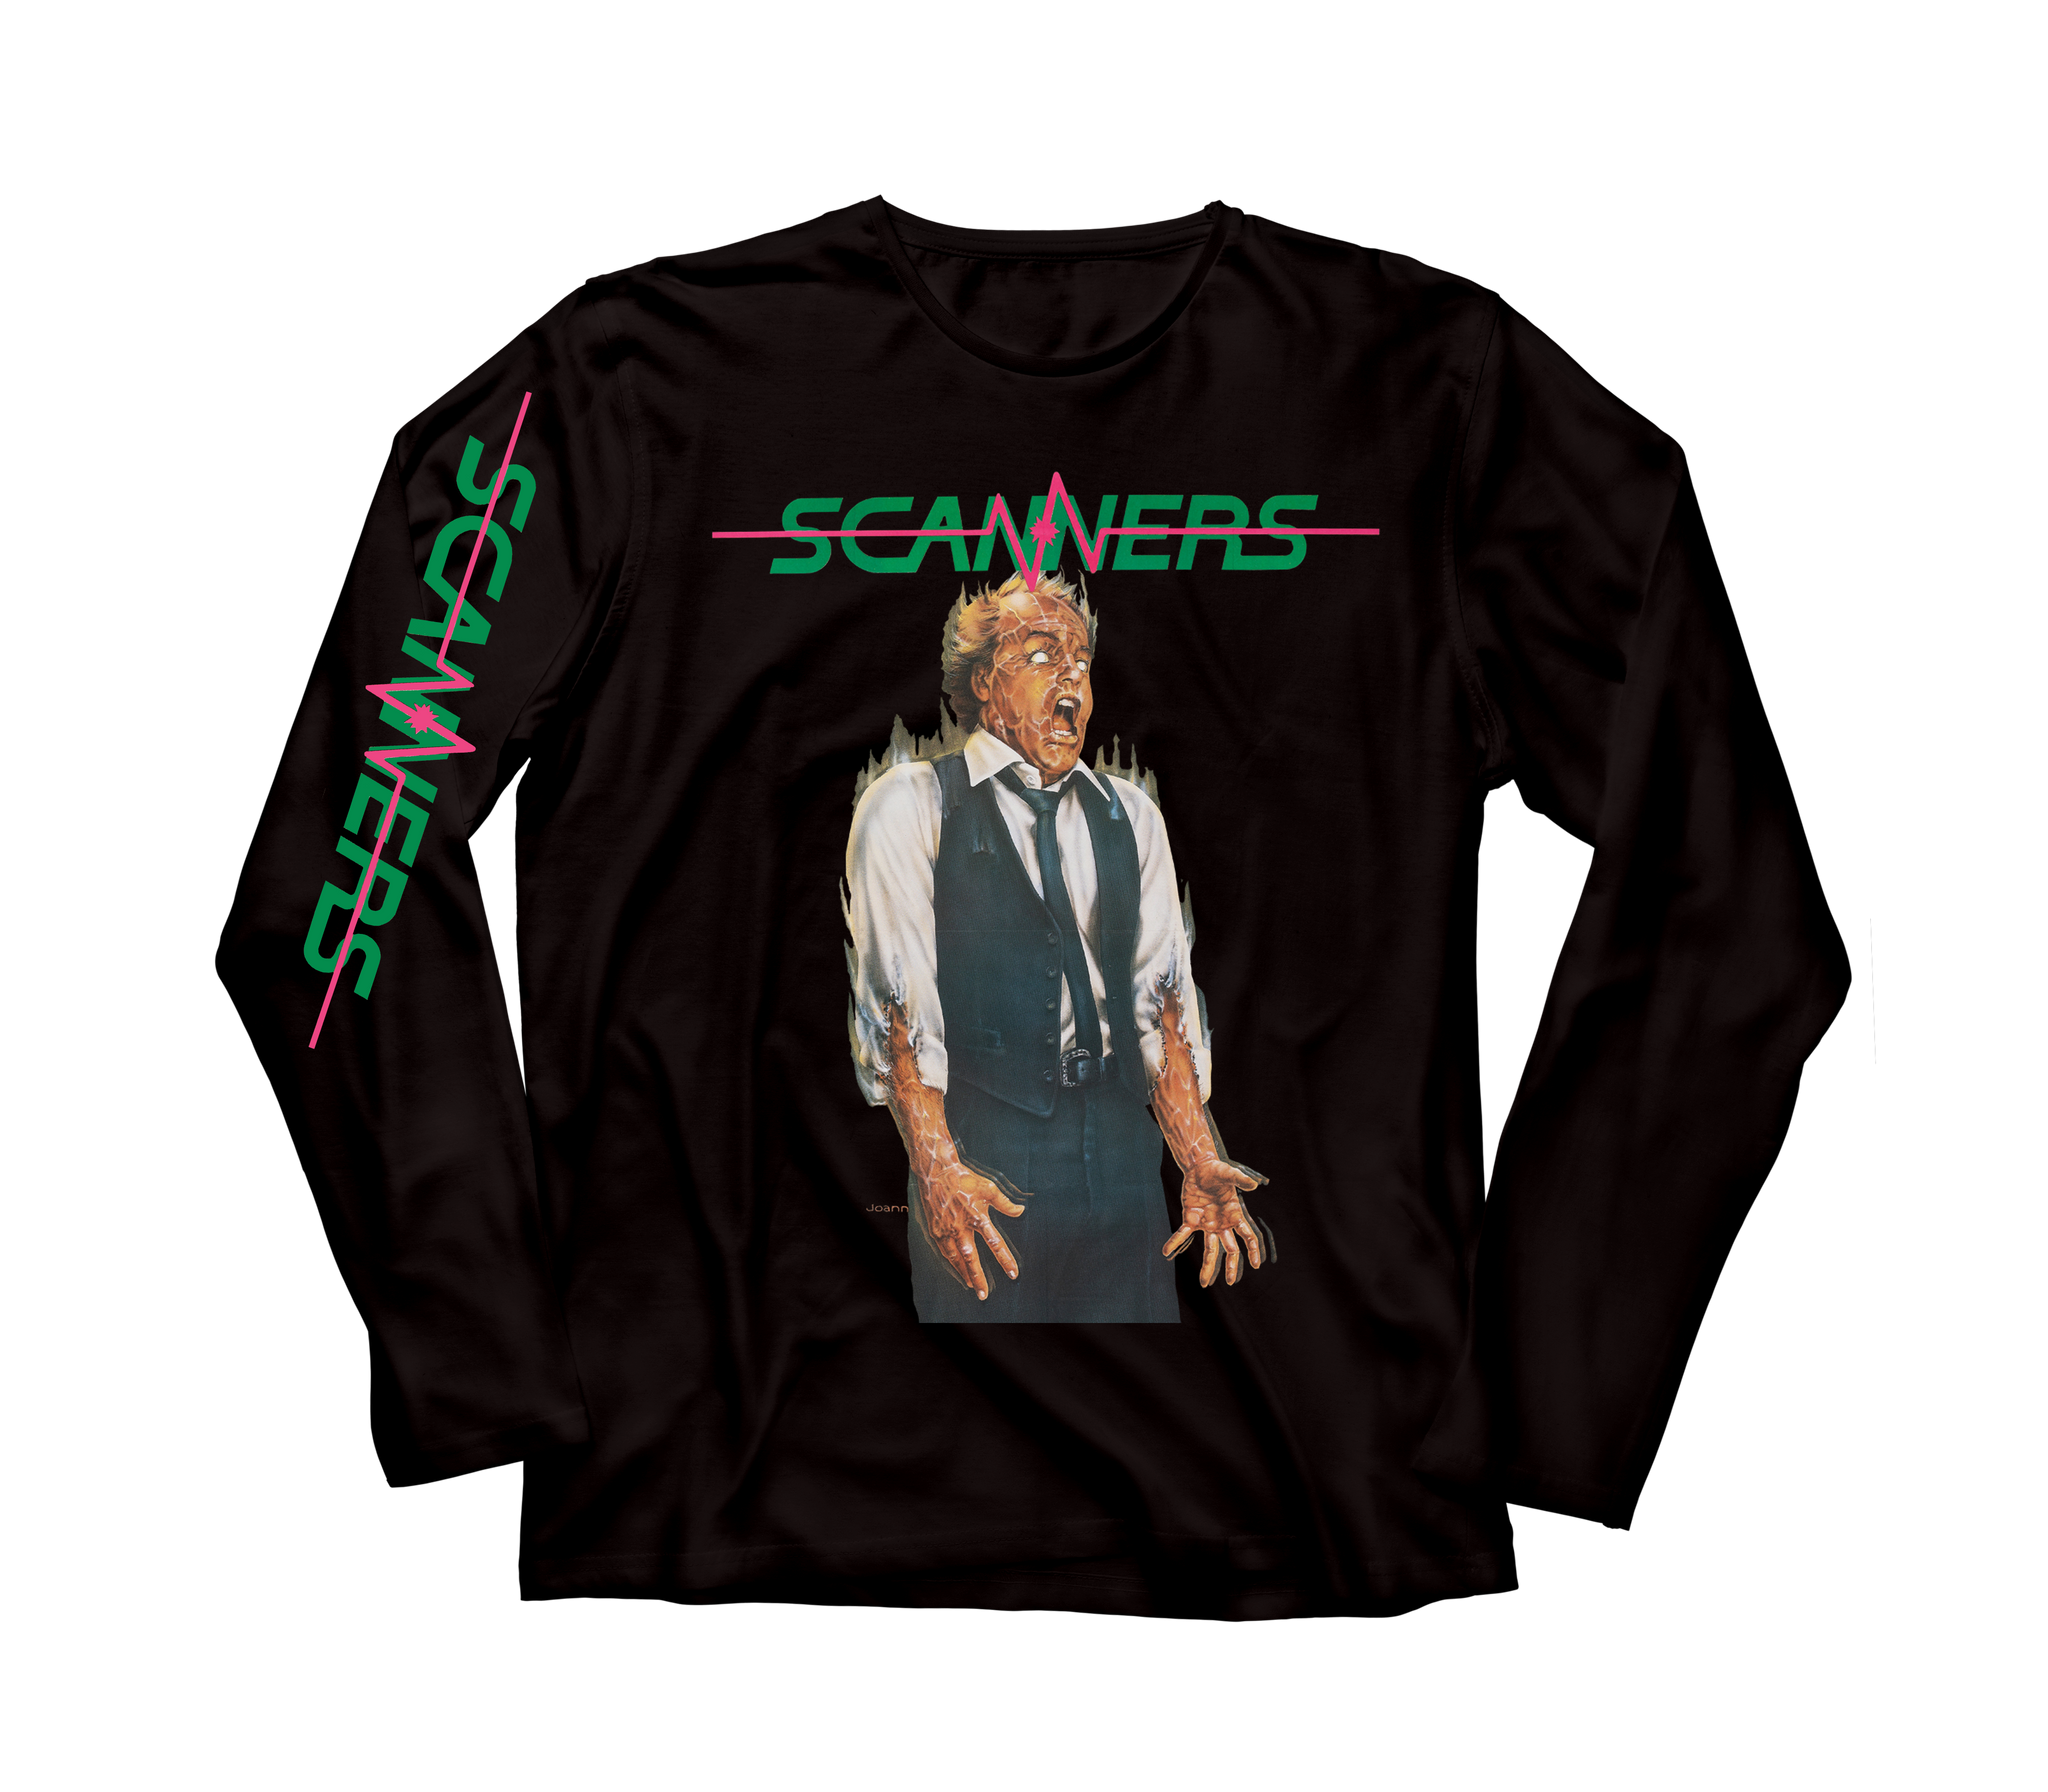 SCANNERS "FRENCH POSTER" LONGSLEEVE T-SHIRT